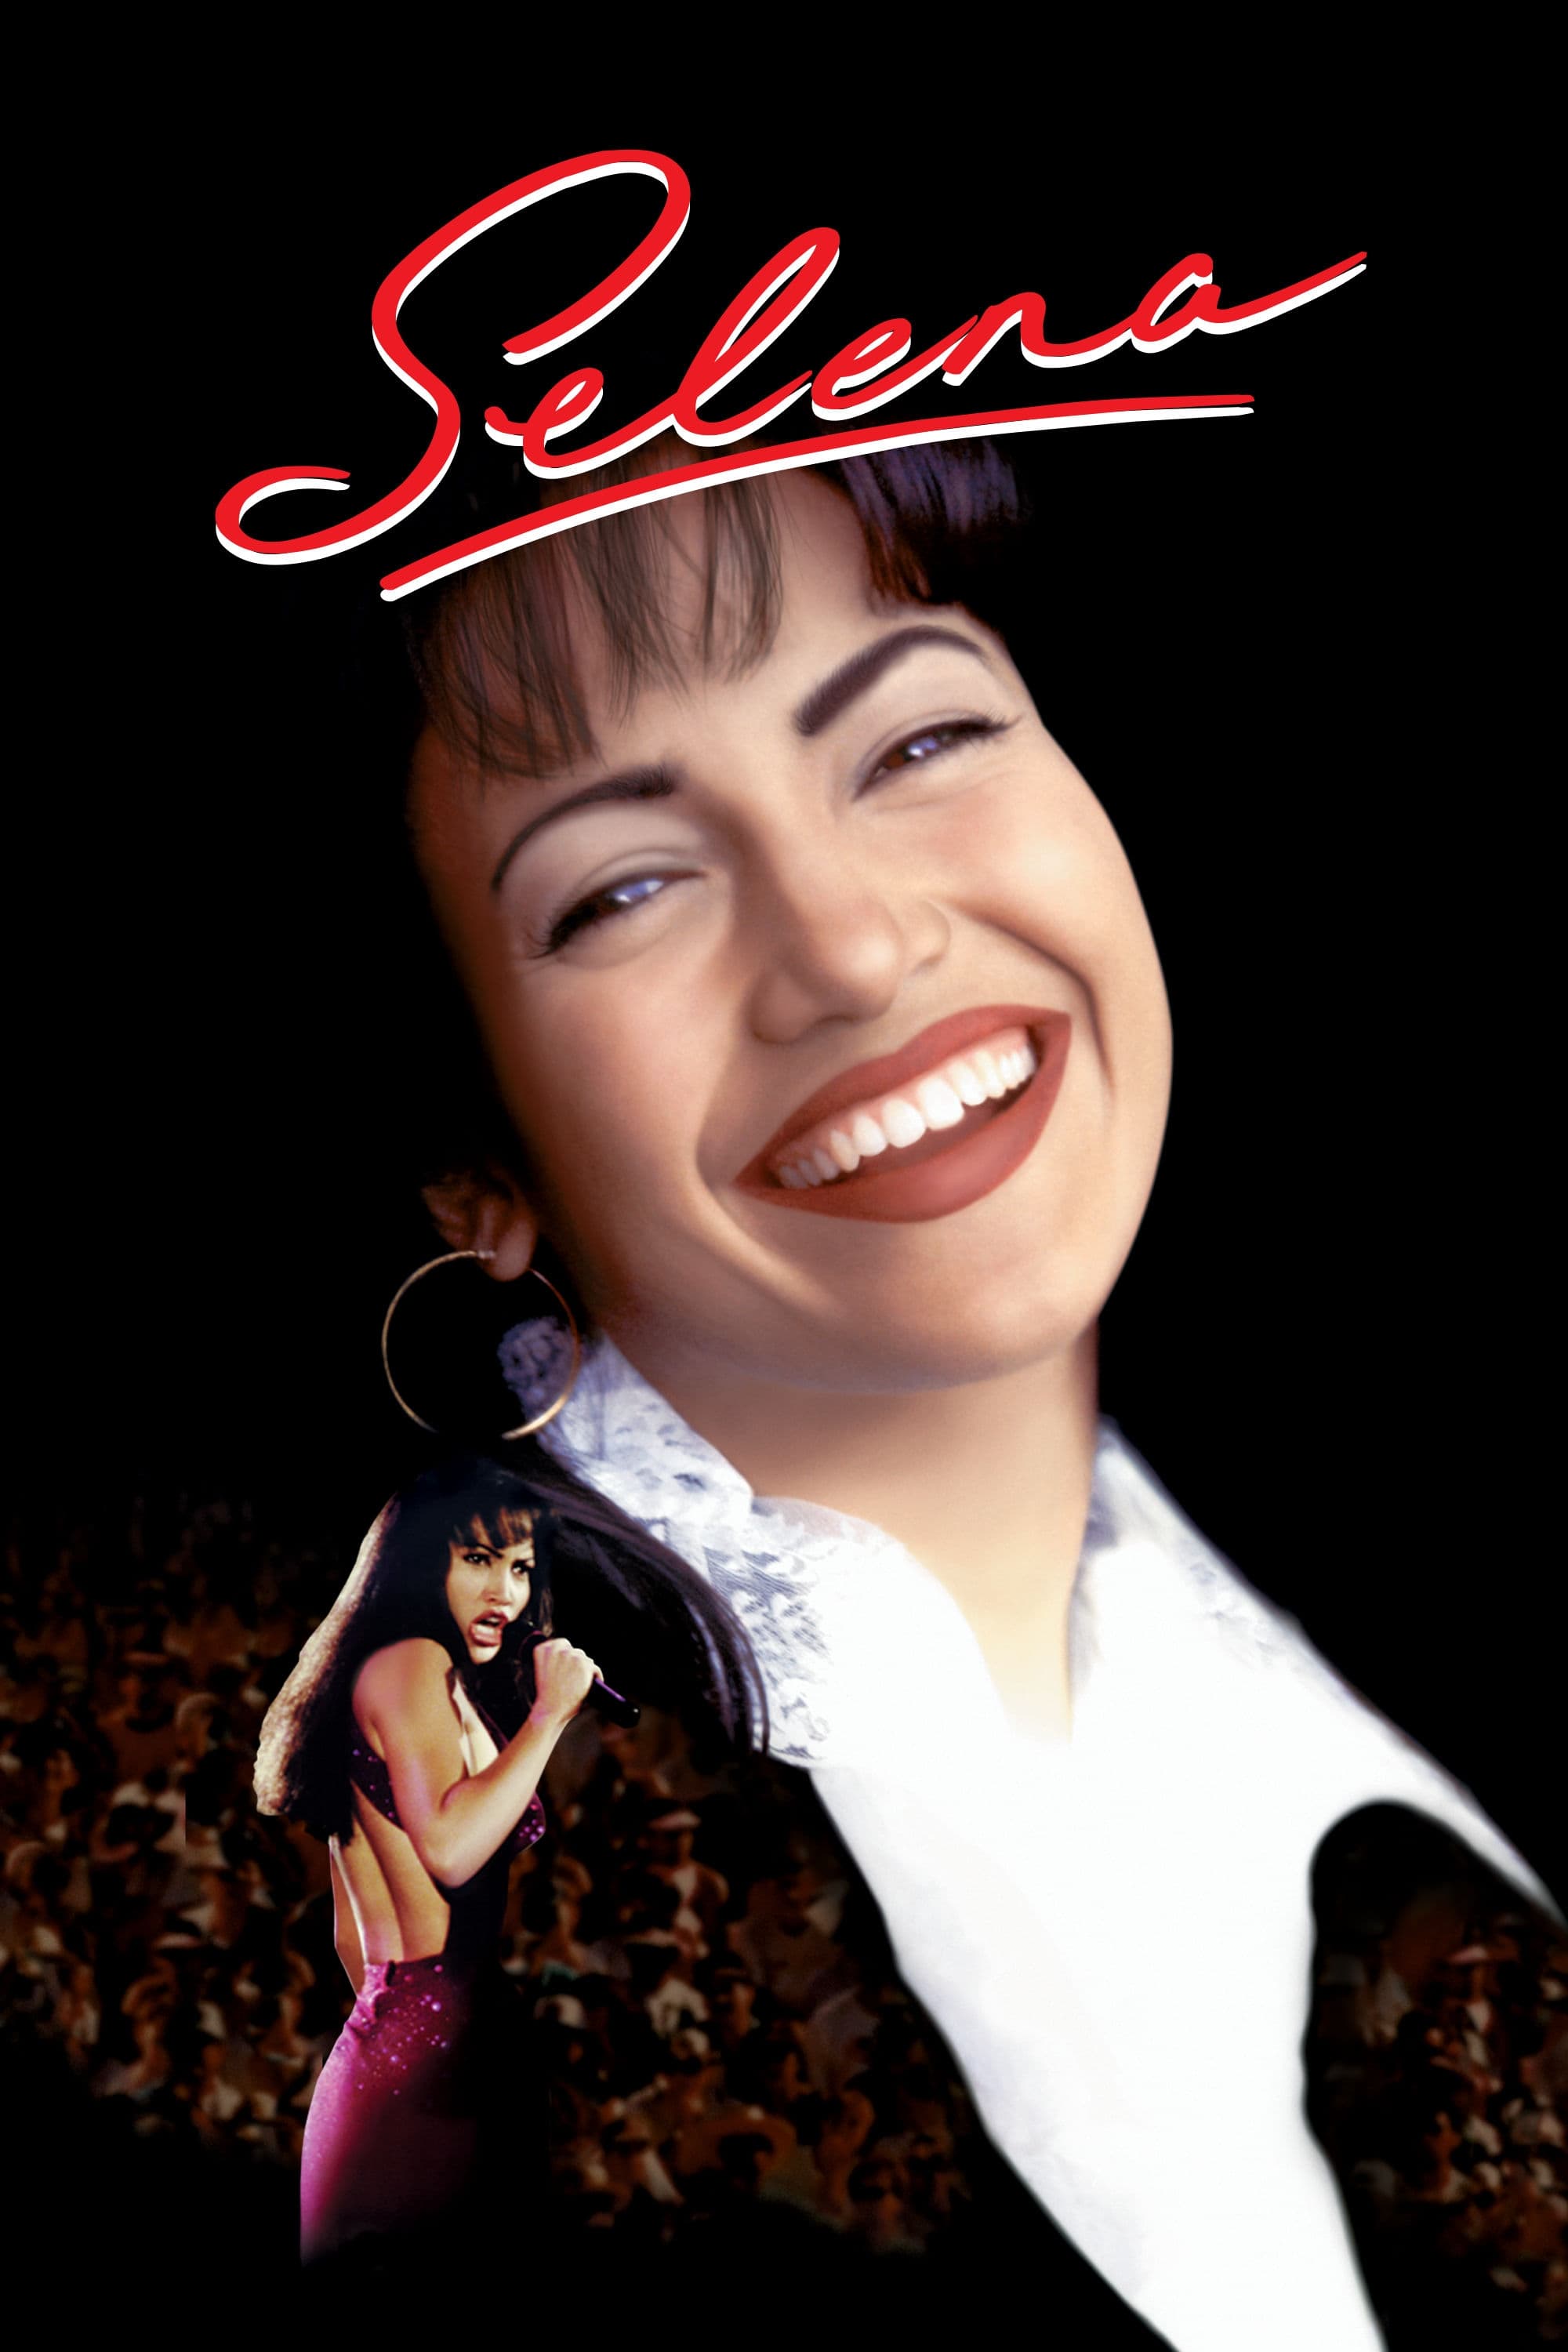 barrie austin recommends Watch Selena Movie Free